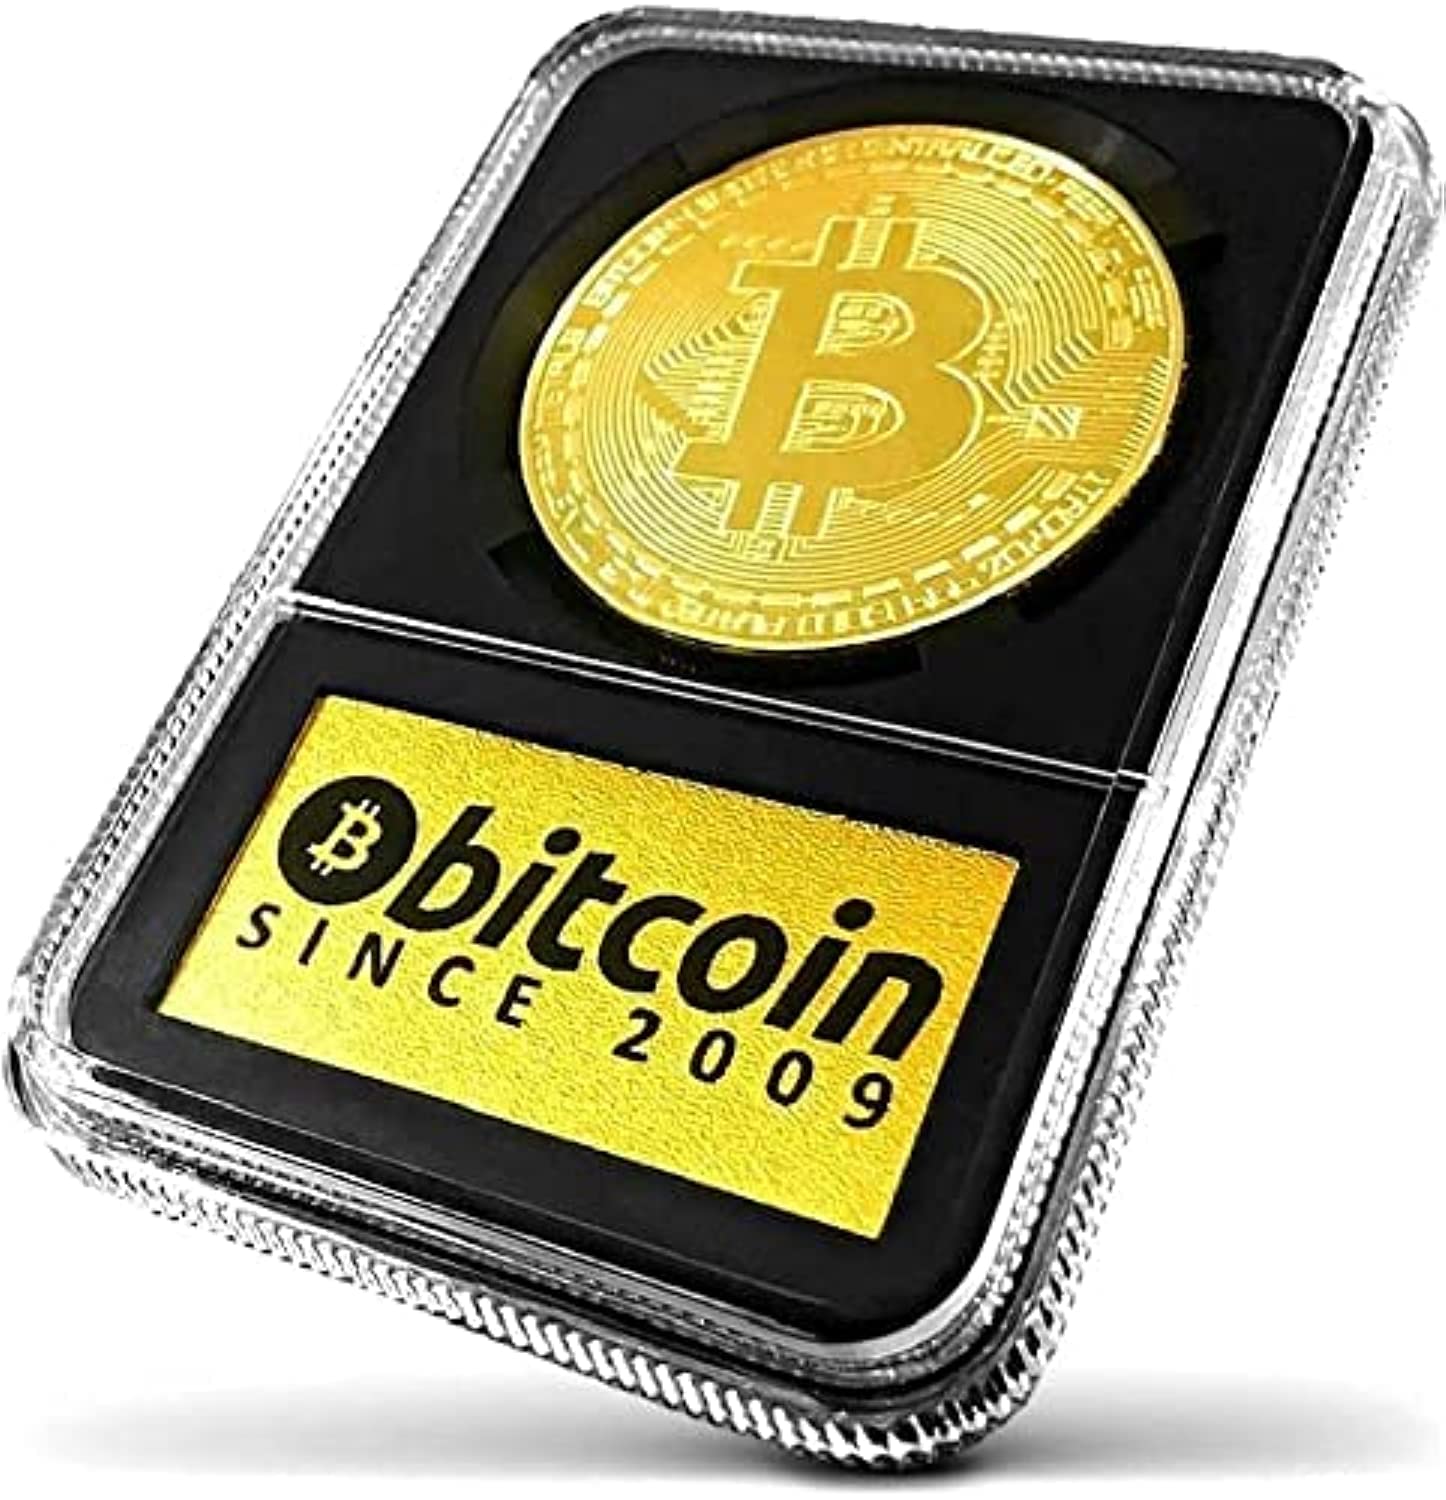 Gold bar and cryptocurrency symbol